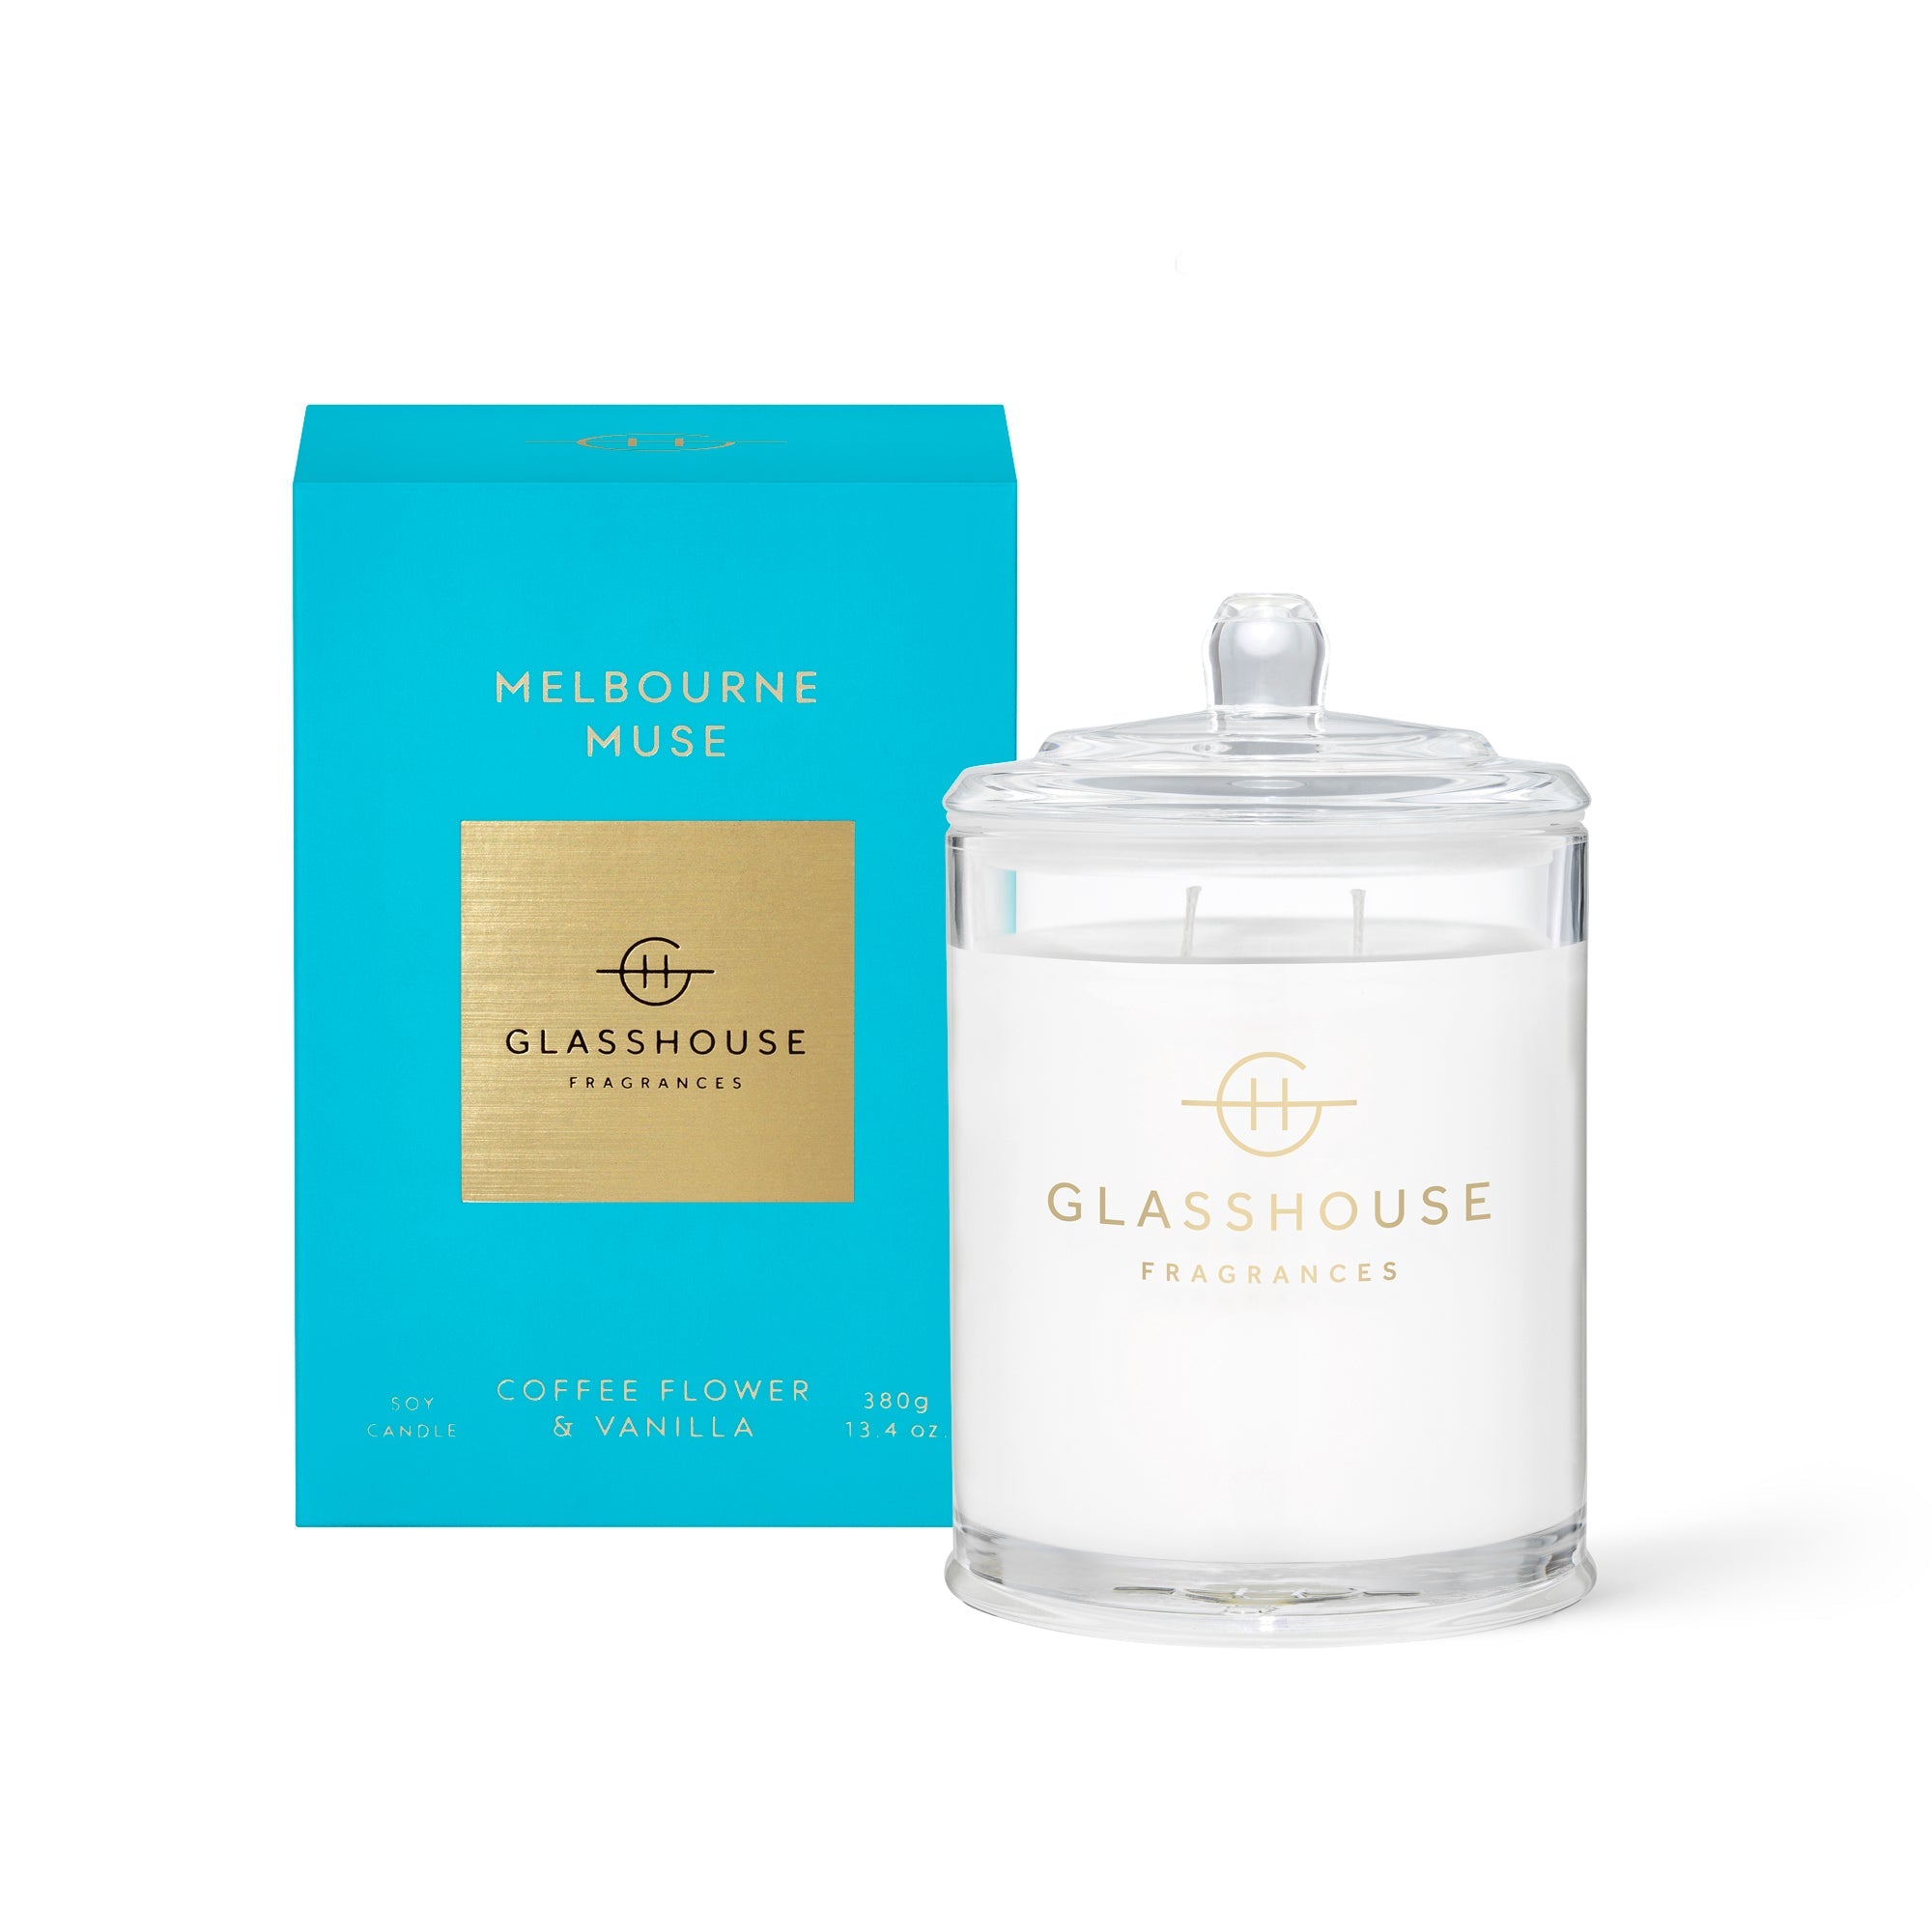 Glasshouse Melbourne Muse Candle 380g - Exquisite Laser Clinic